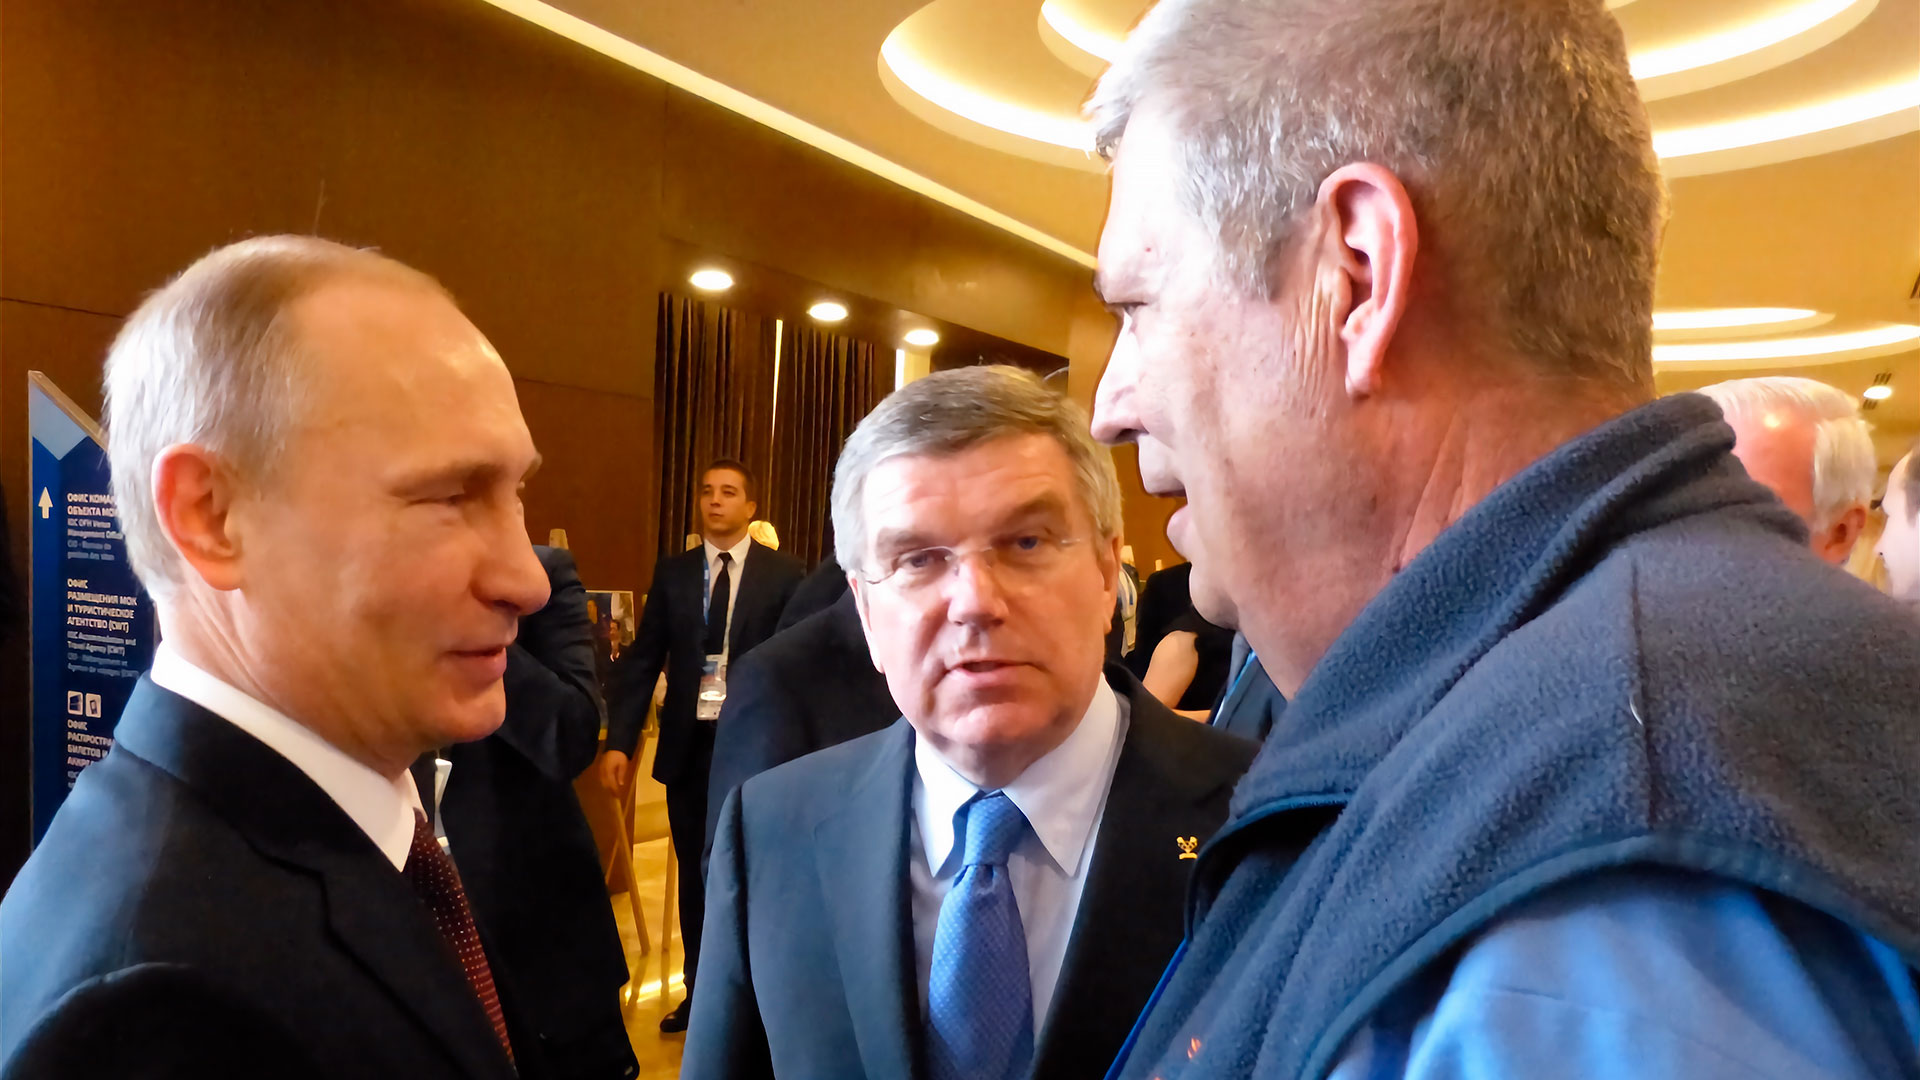 From left to right, Vladimir Putin, Thomas Bach and Ed Hula, Around the Rings Founder. (Photo by: Sheila Hula)